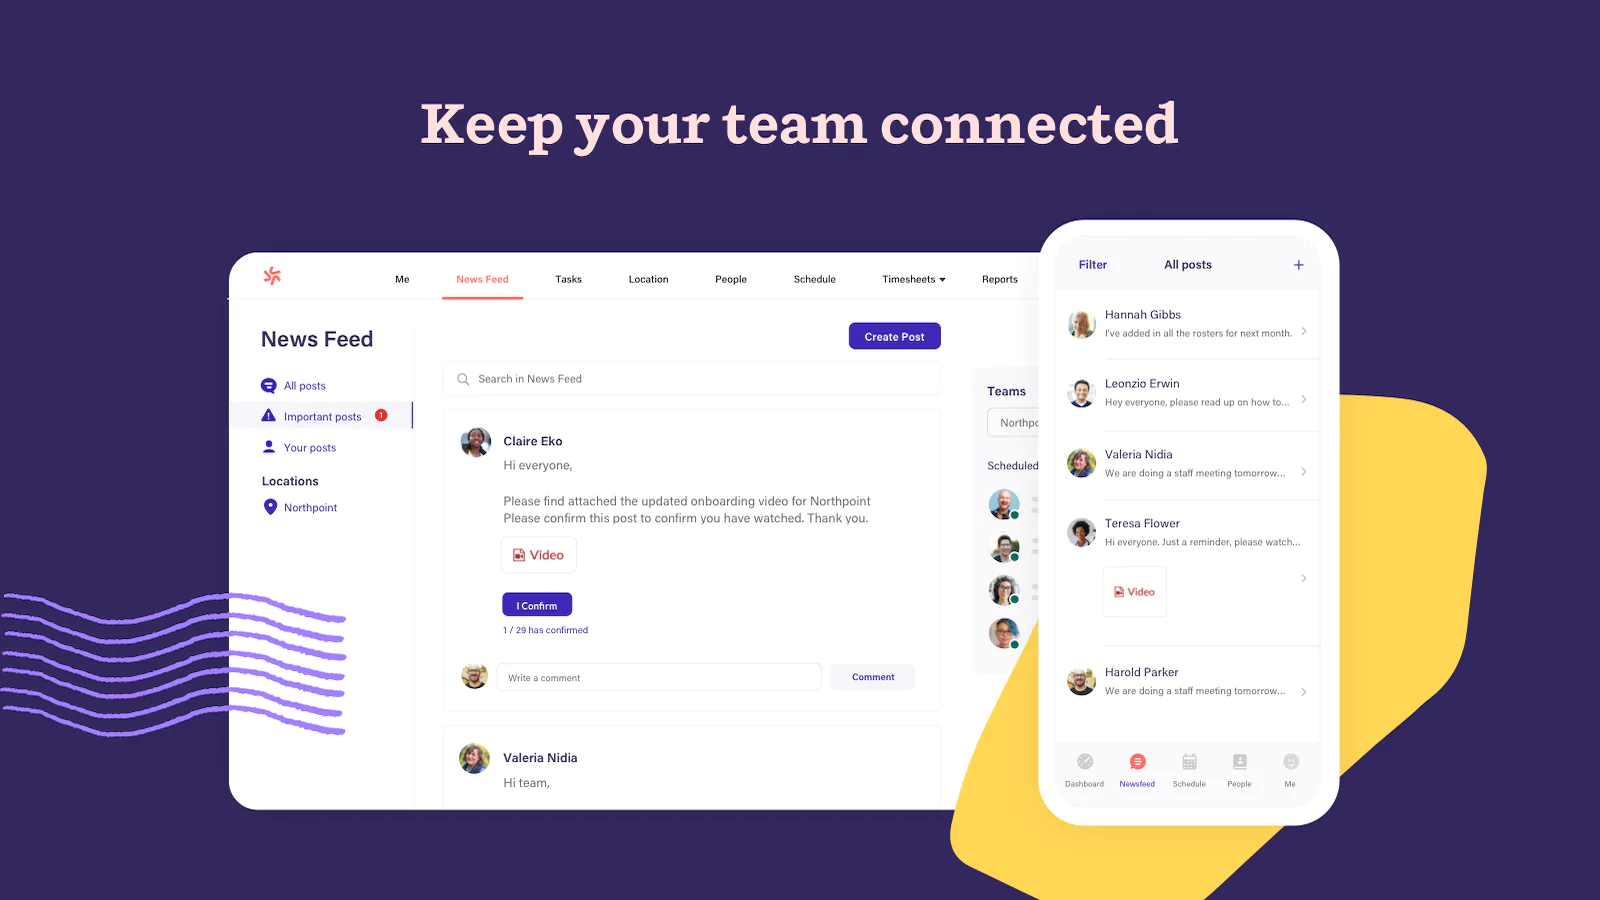 Stay connected with your team on all devices